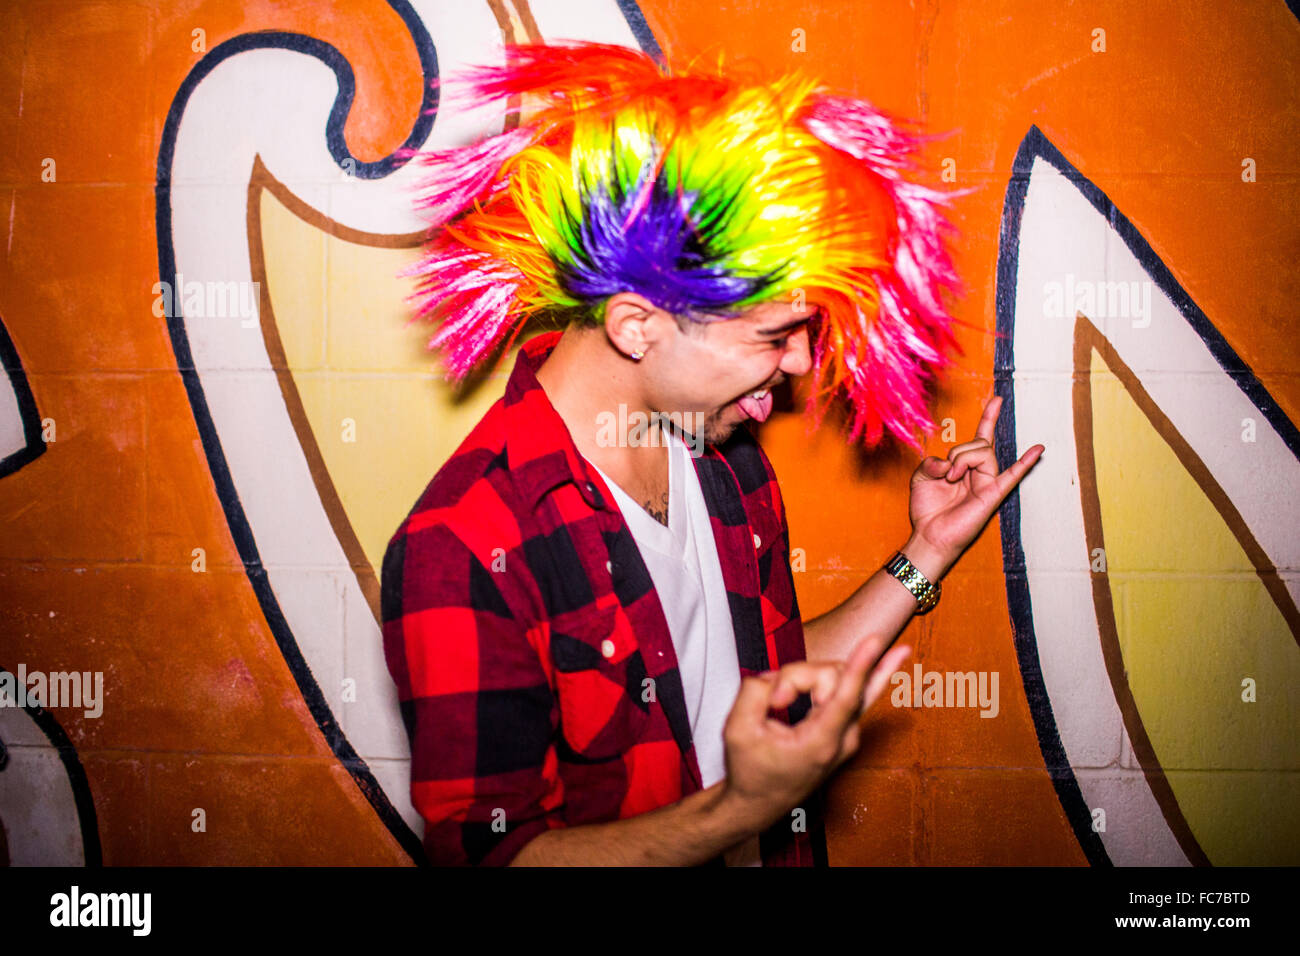 Hispanic man wearing colorful wig Banque D'Images